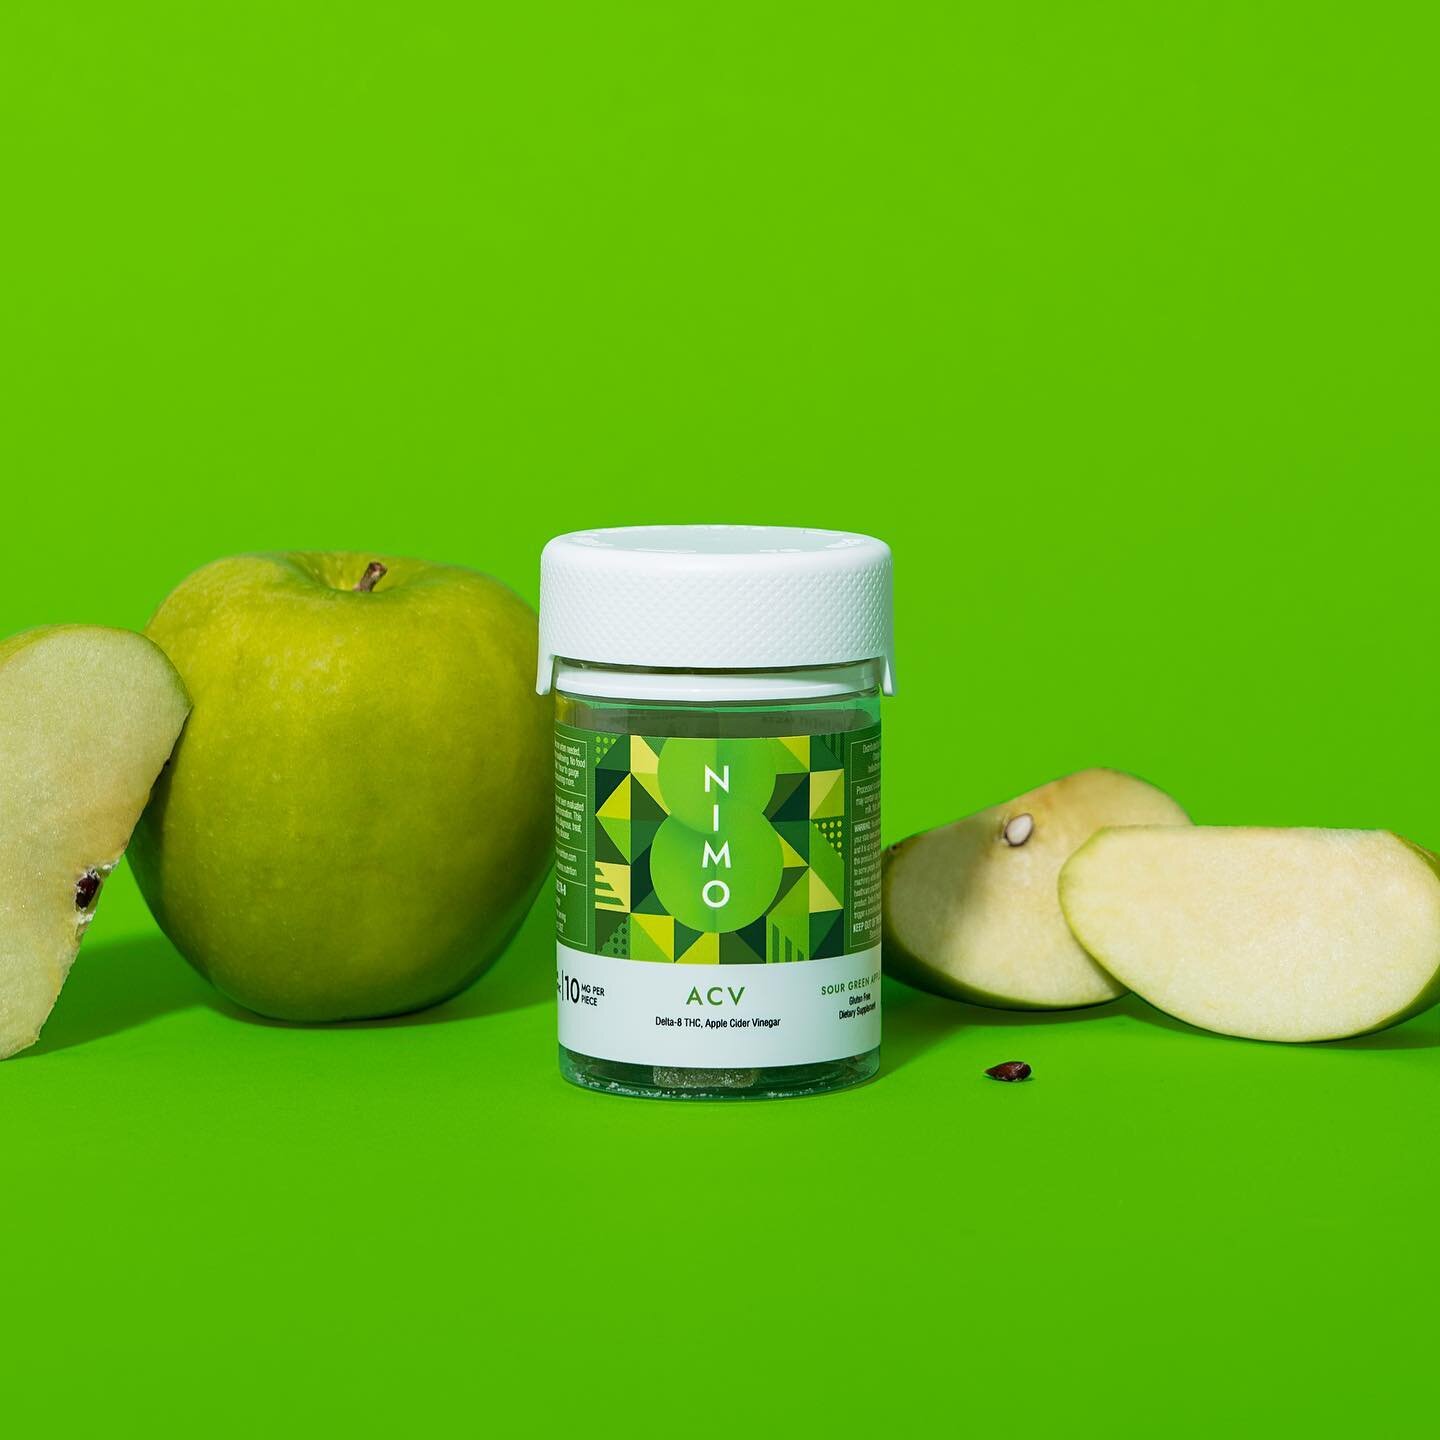 ACV EDIBLE??🤔
__
 
A Sour green apple flavor with 200mg of apple cider vinegar aka &ldquo;ACV&rdquo; and 10mg of Delta 8 THC. 

Well, as some may know already.
Cannabis and THC (the active ingredients) have been known to have its anti-inflammatory p